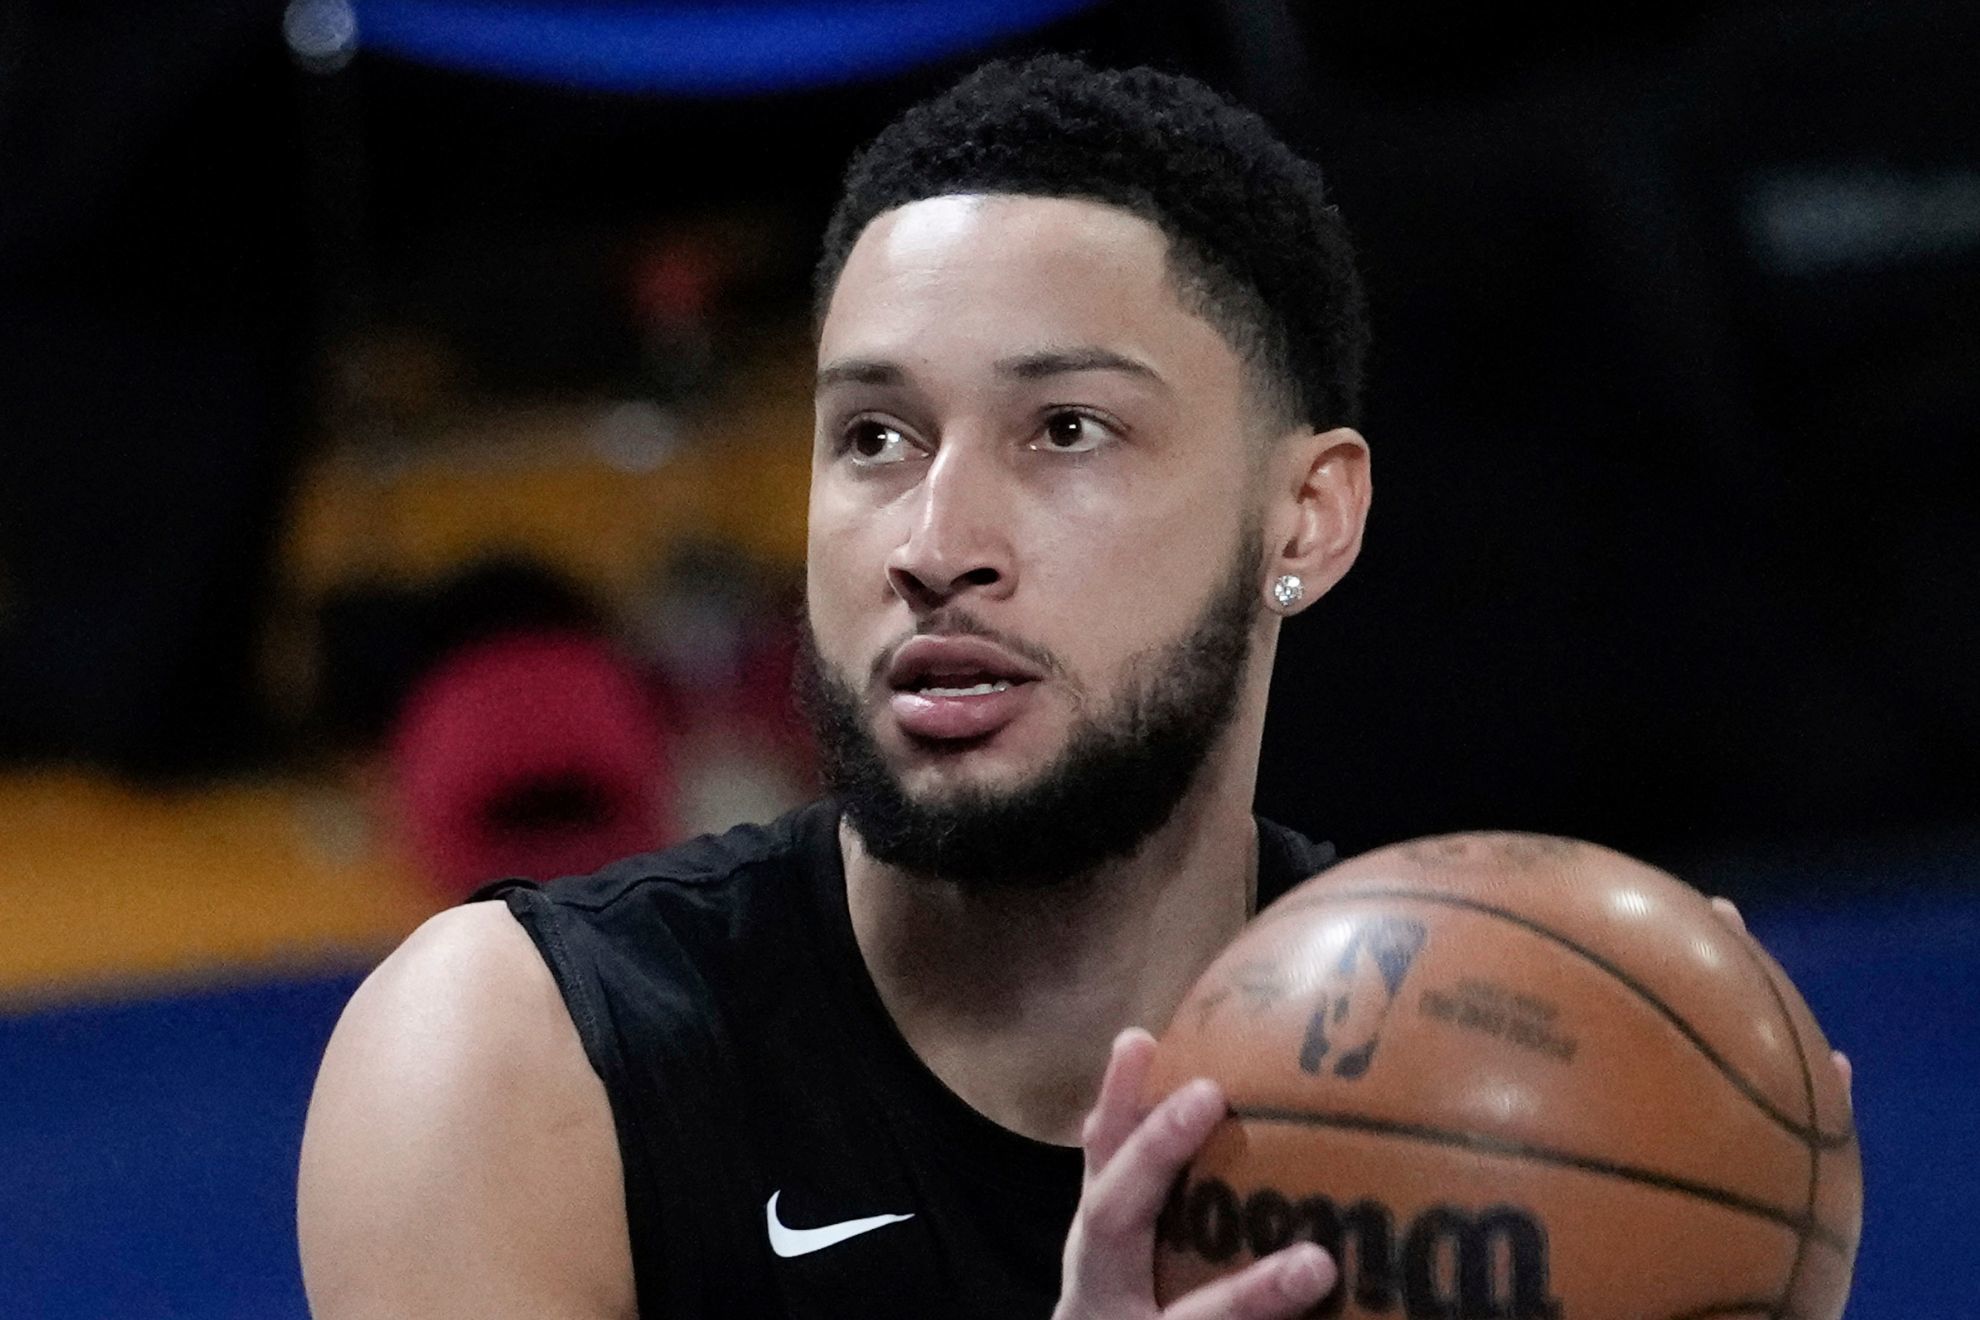 Ben Simmons sets a new Nets record in his highly-anticipated return to action